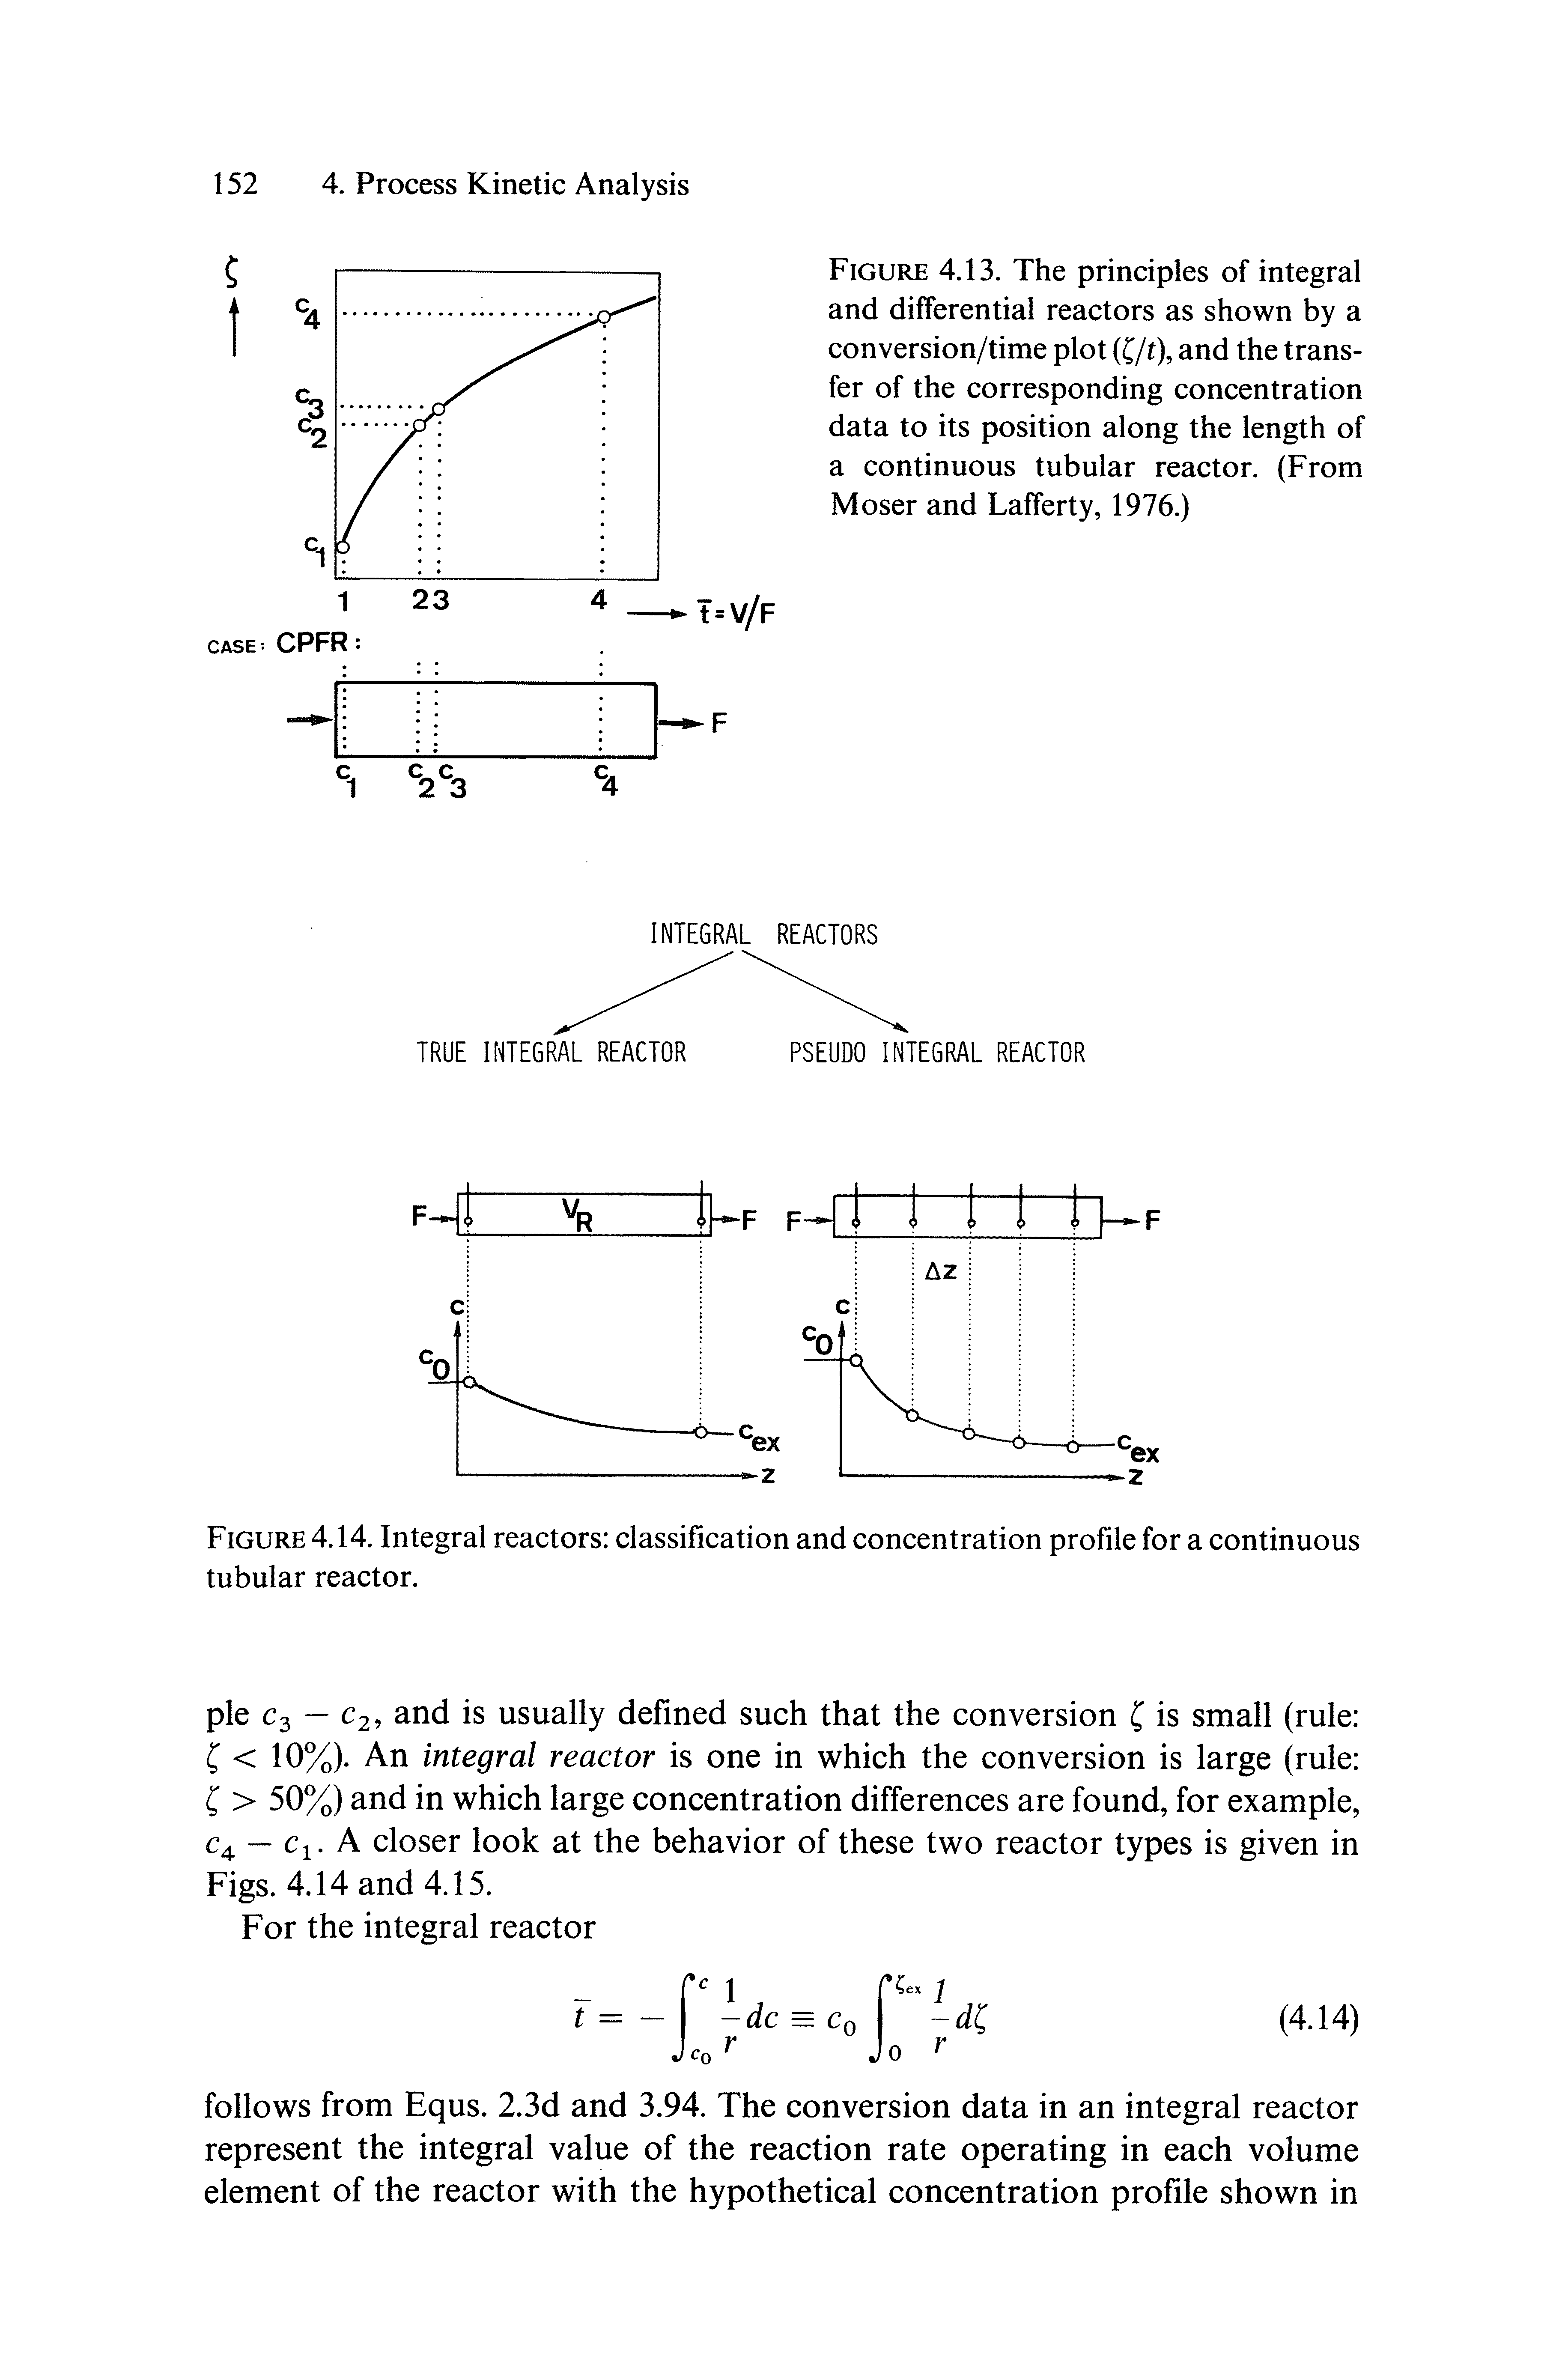 Figure 4.13. The principles of integral and differential reactors as shown by a conversion/time plot (C/t), and the transfer of the corresponding concentration data to its position along the length of a continuous tubular reactor. (From Moser and Lafferty, 1976.)...